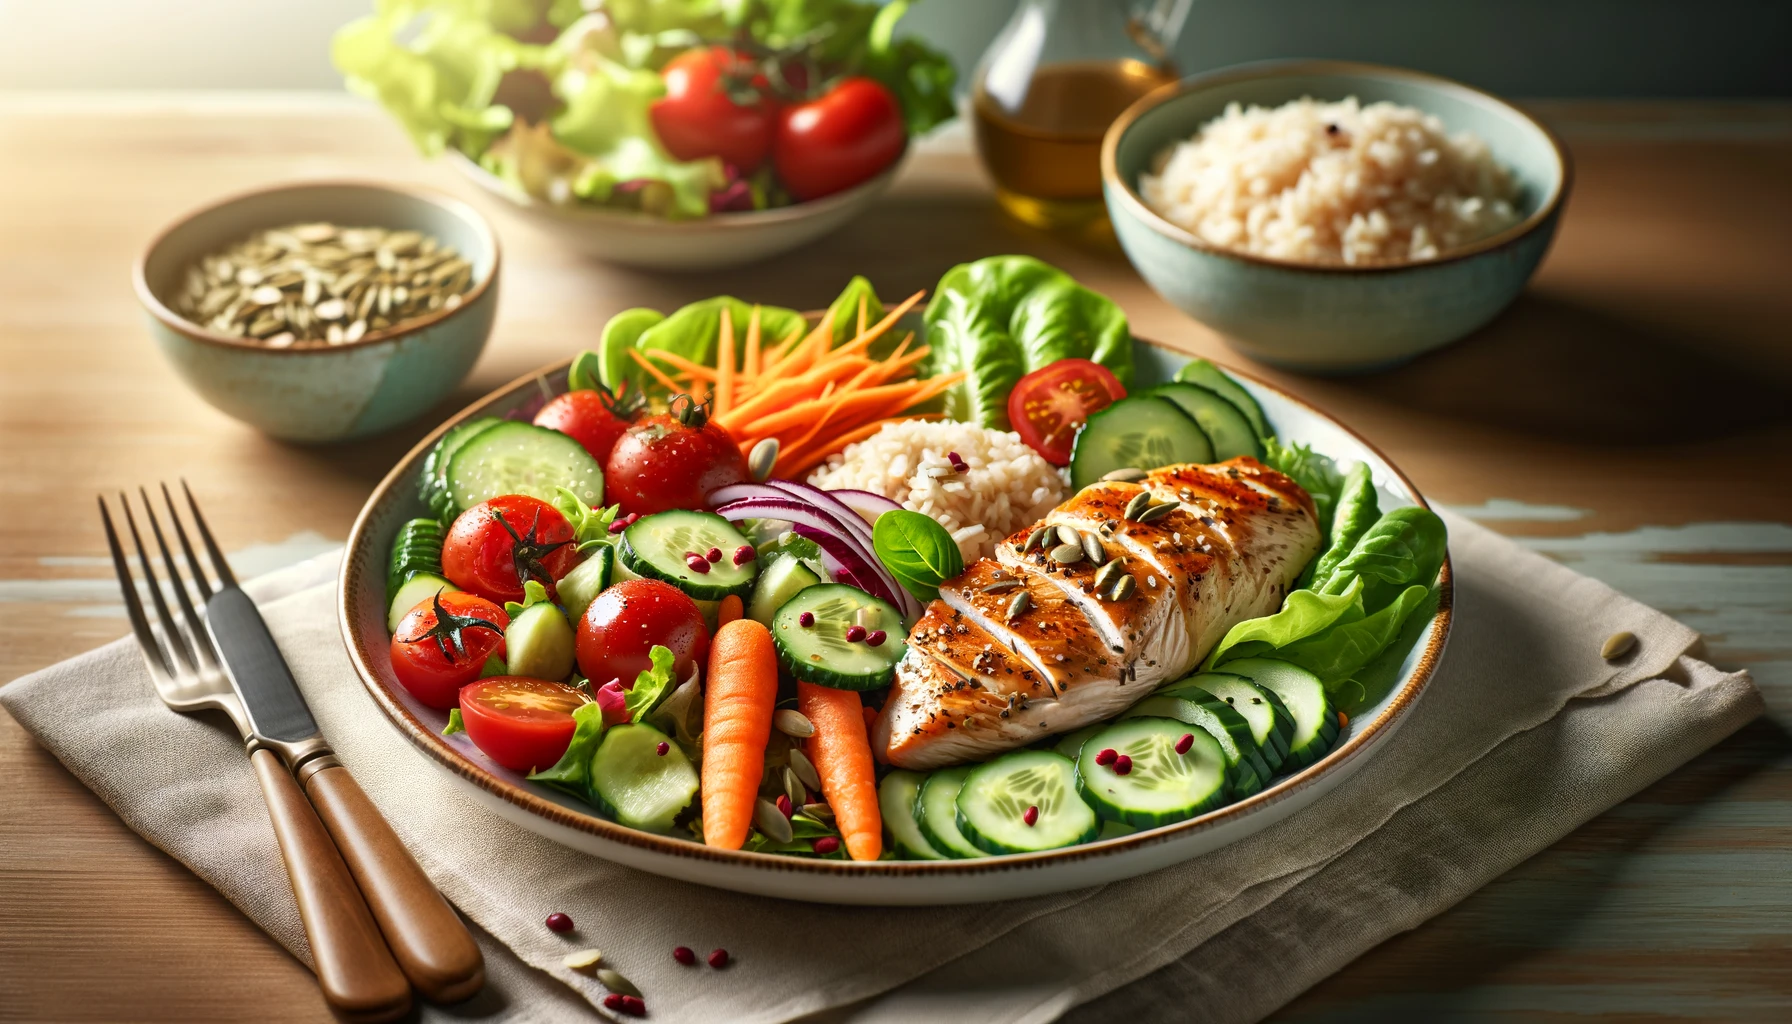 Nutritious meal representing the concept of nutrition on Healthy Life - New Start blog.